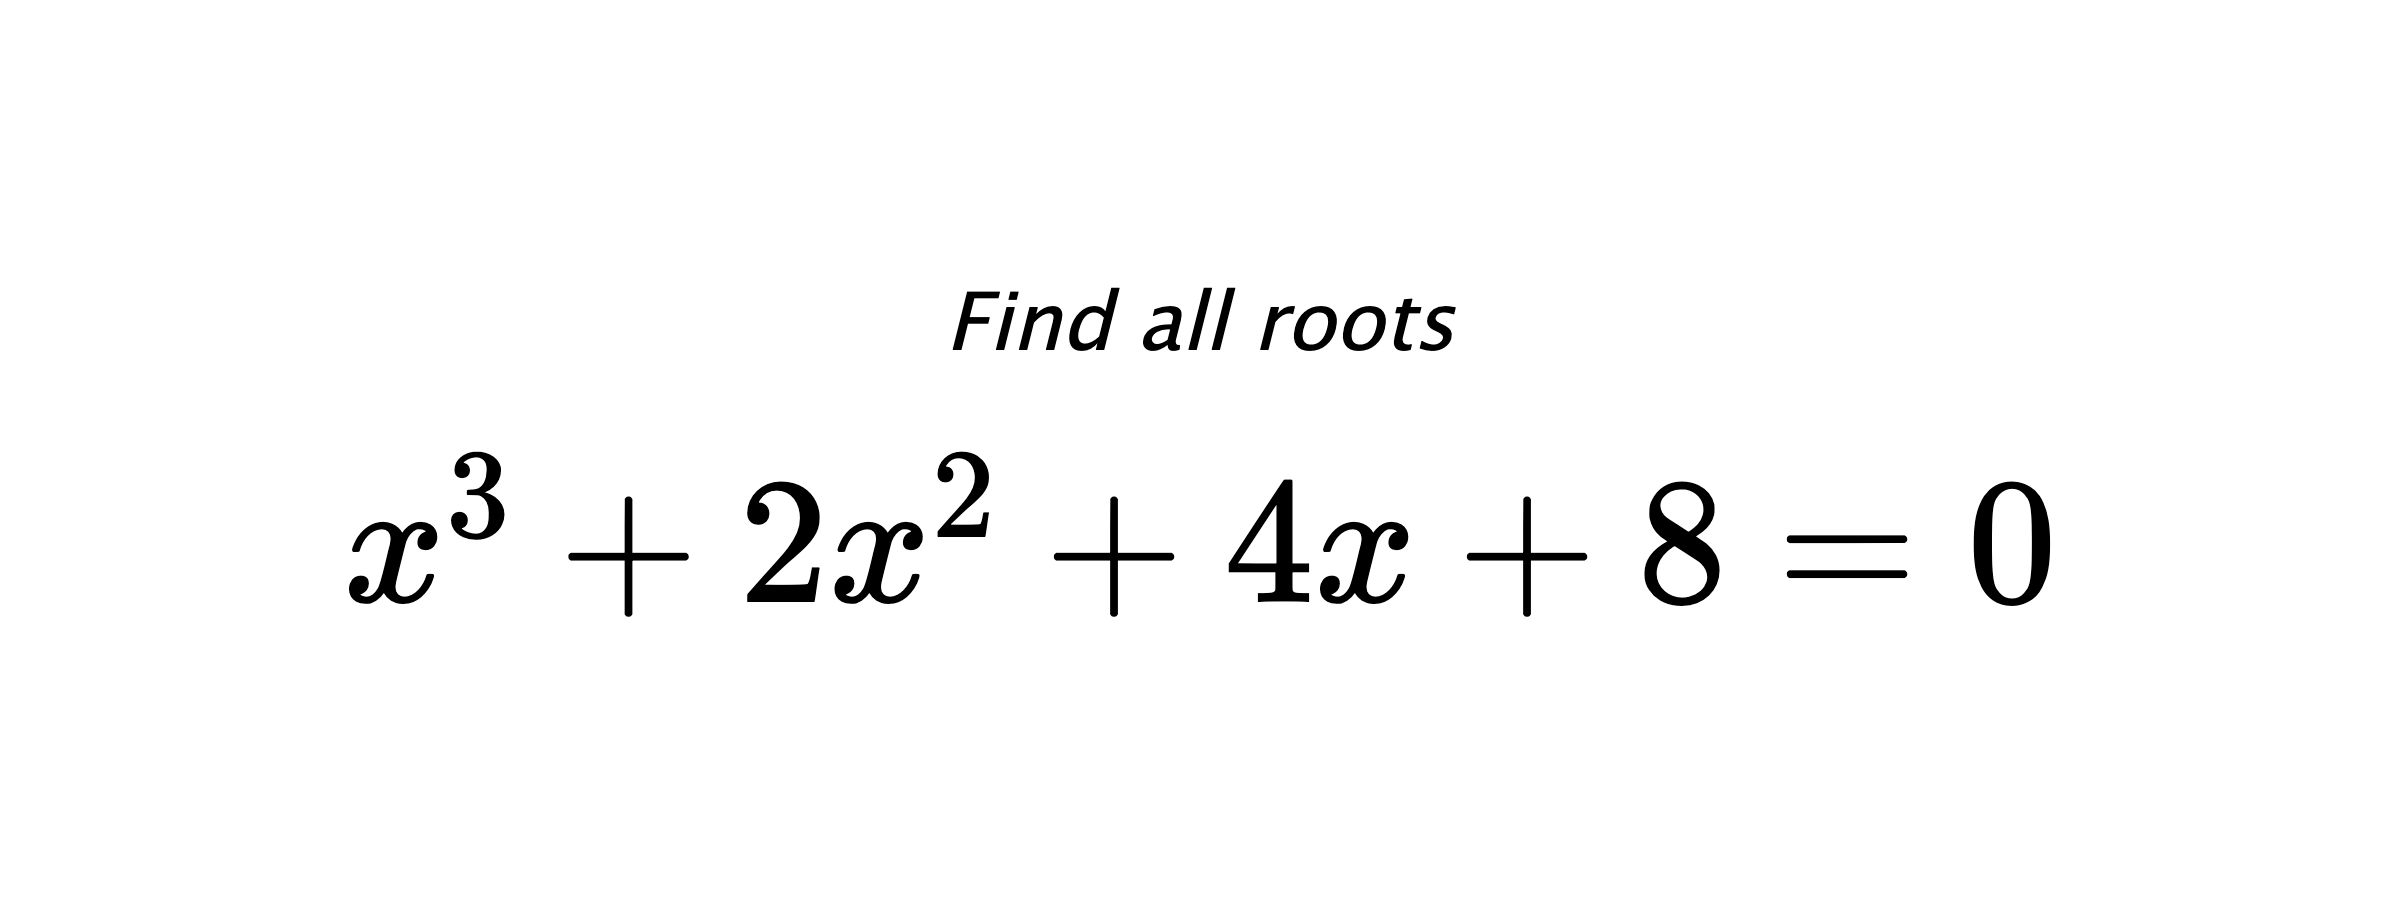 Find all roots $ x^{3}+2x^{2}+4x+8=0 $